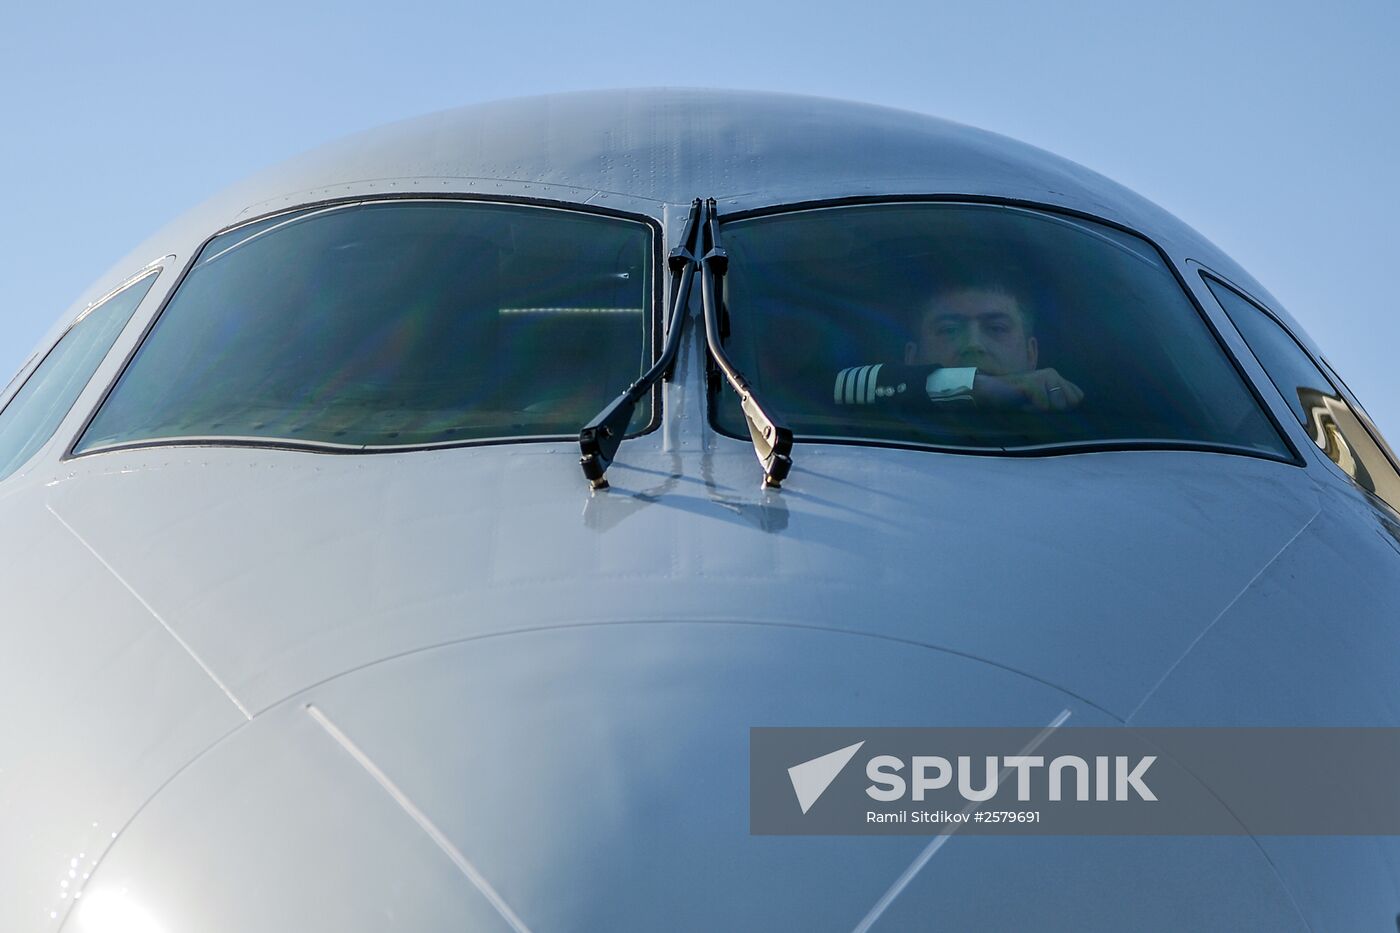 Putting Red Wings' Sokhoi Superjet 100 into operation